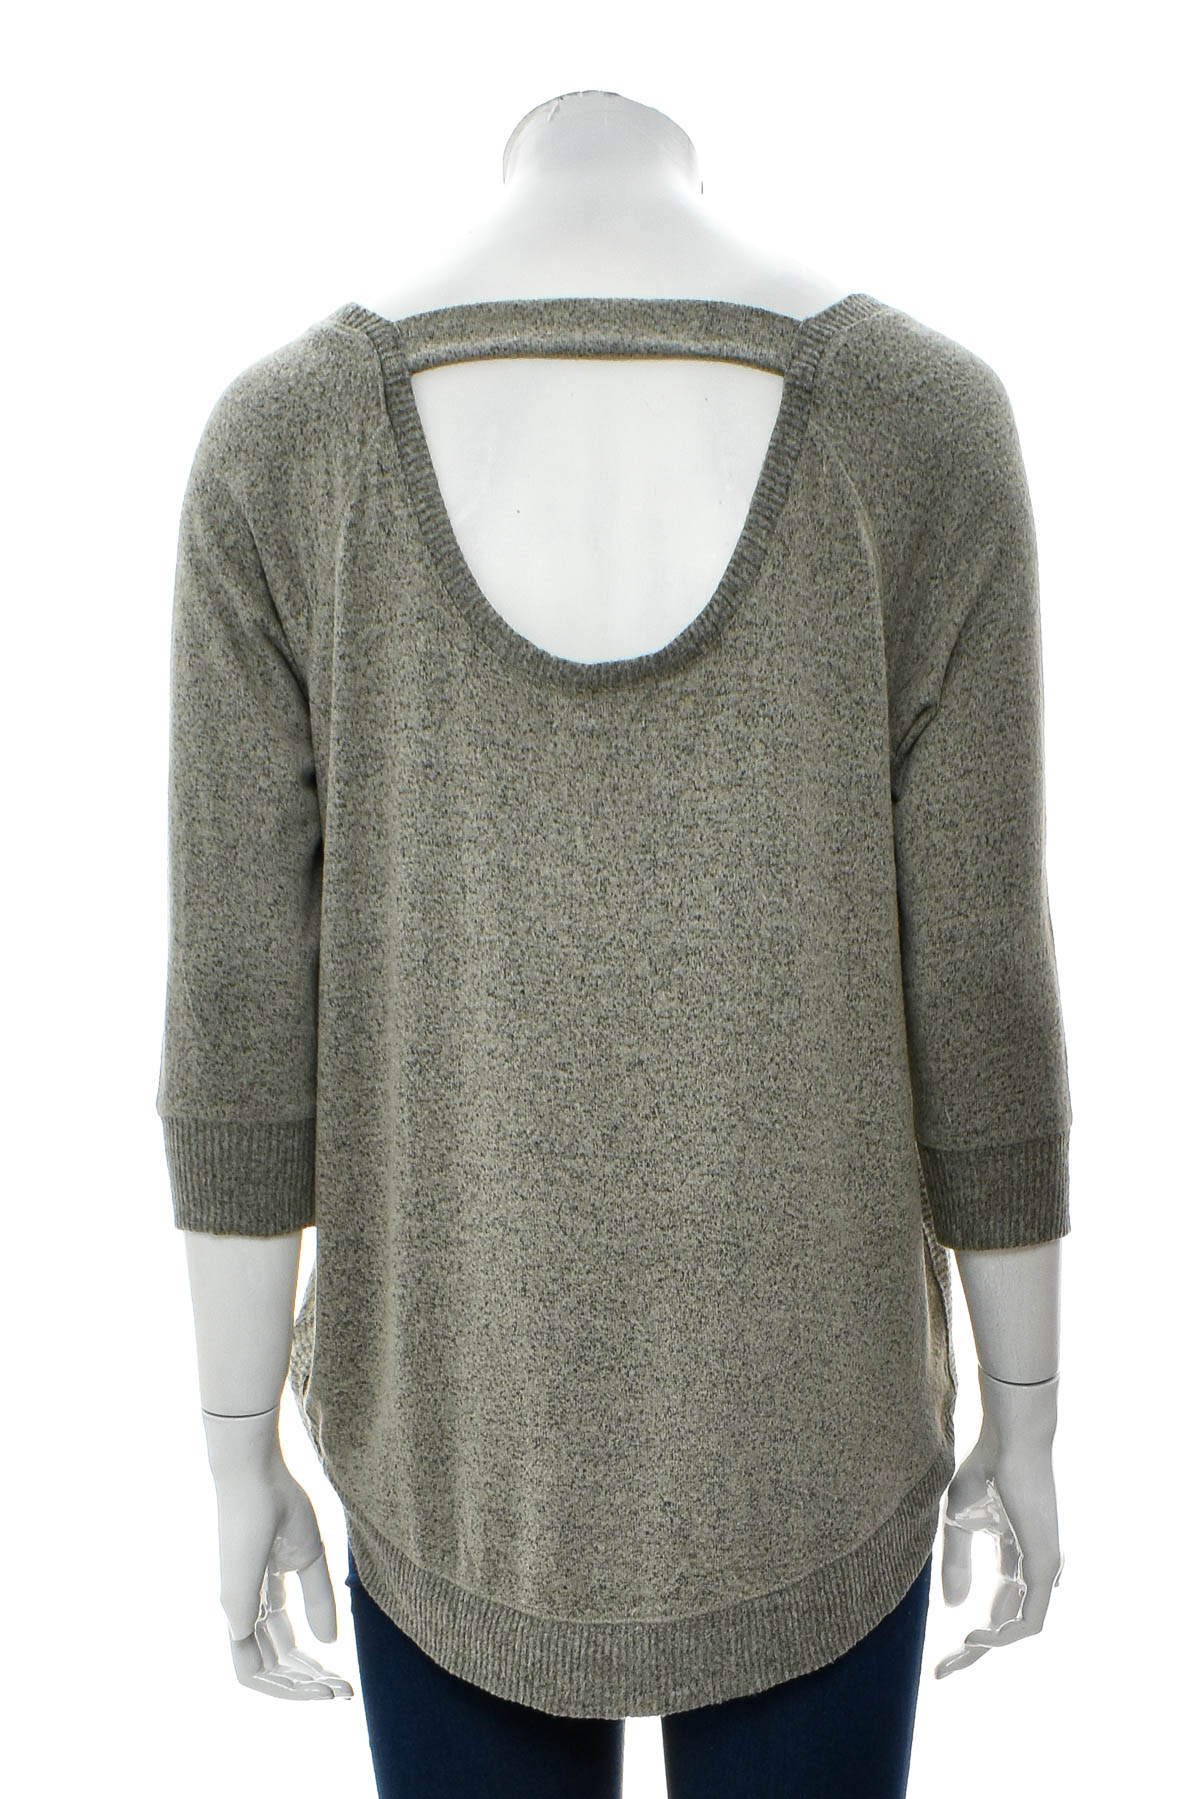 Women's sweater - maurices - 1